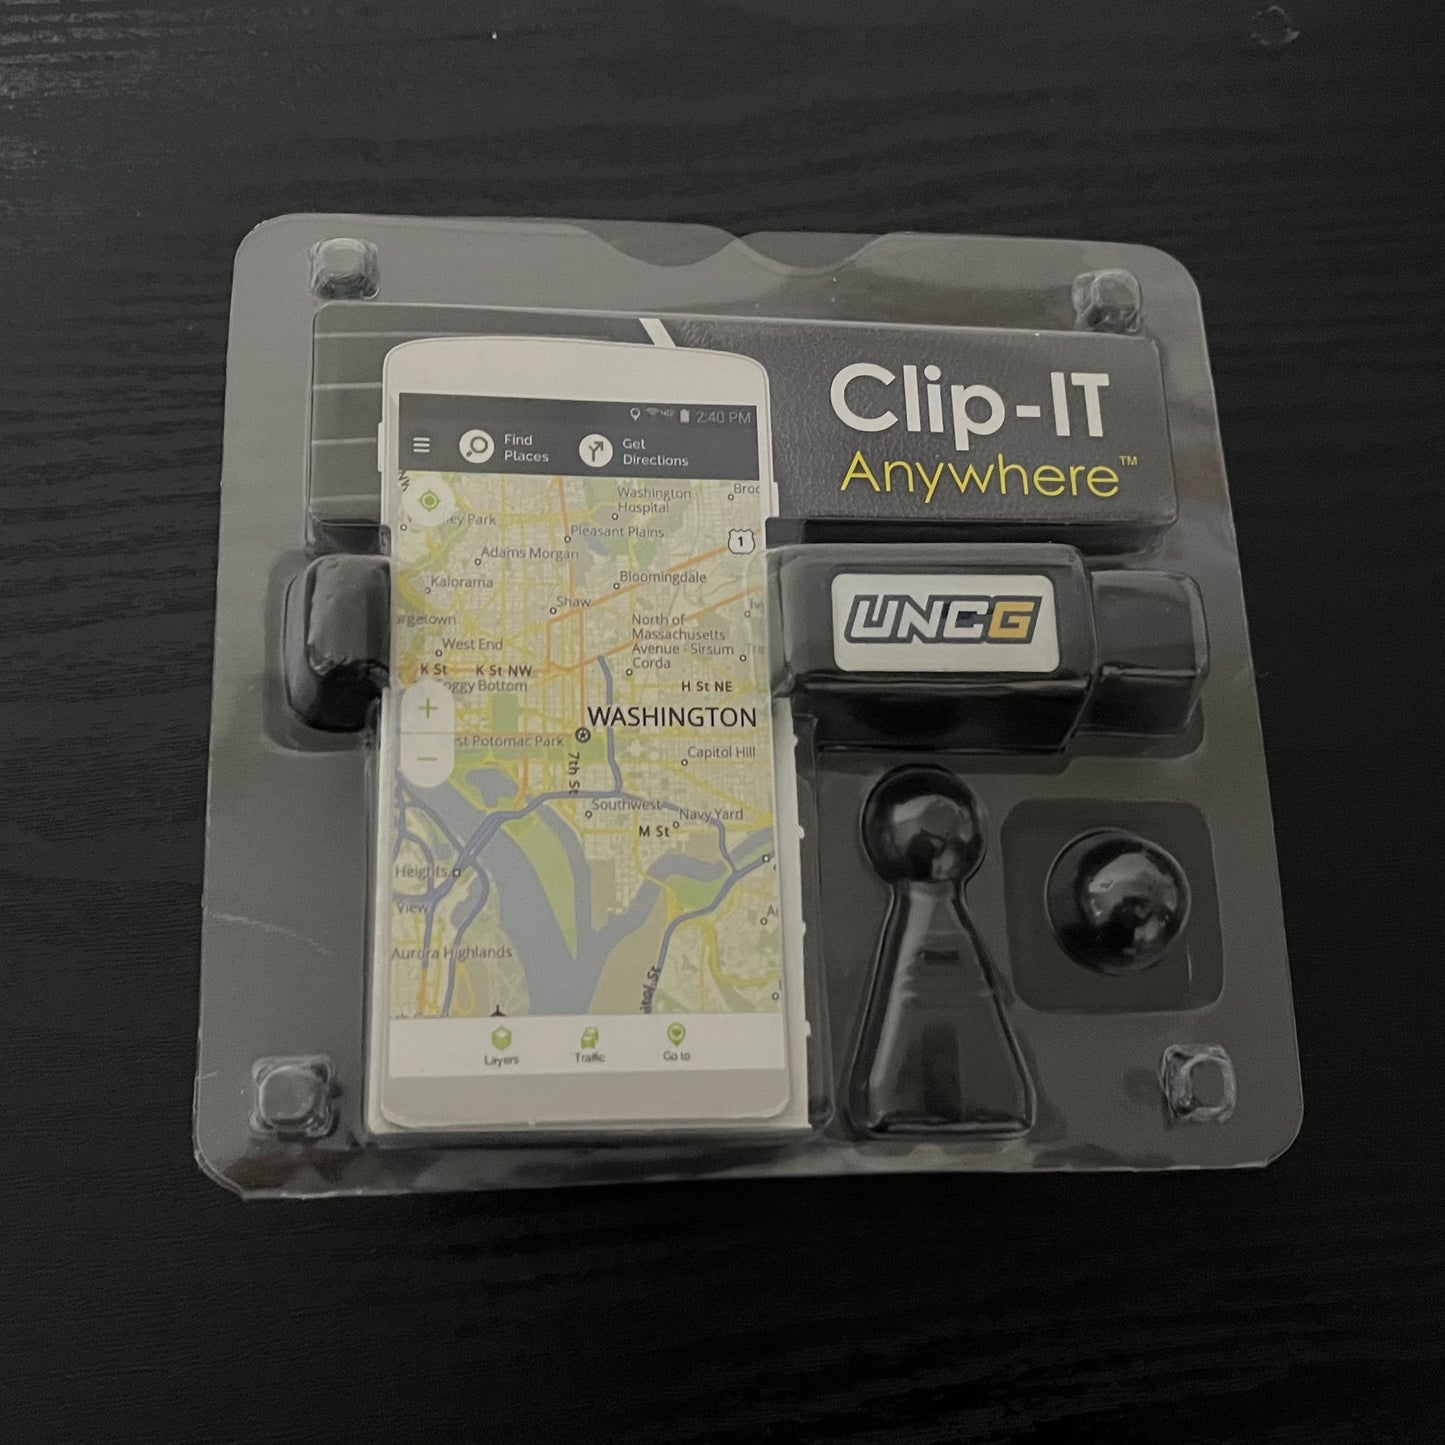 Cellphone Holder w/ UNCG logo  Mounts on car air vent or dashboard. "Clip-IT Anywhere"